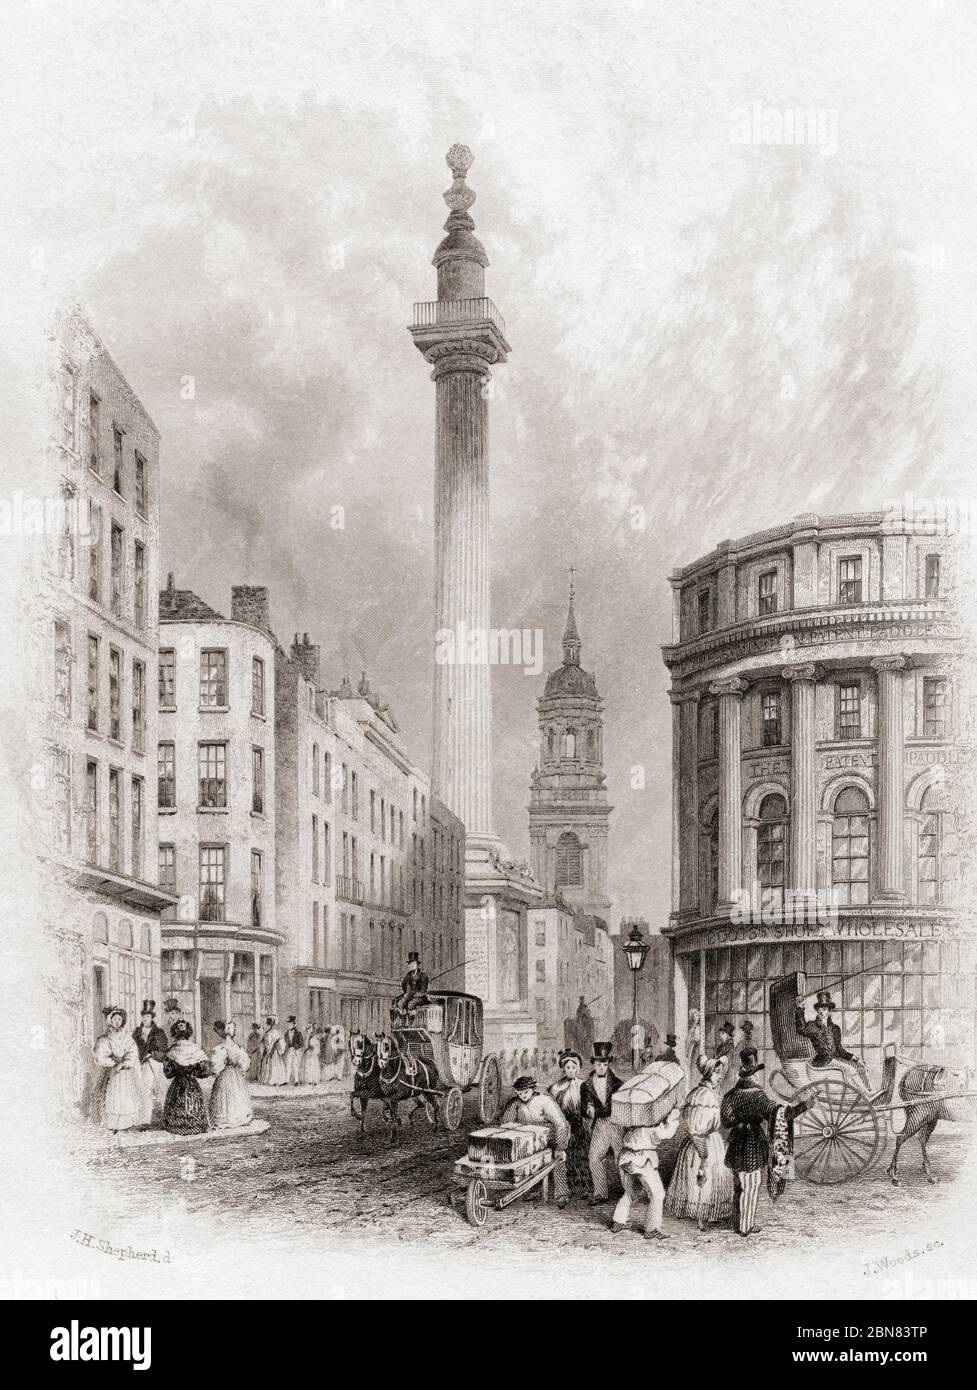 The Monument and St Magnus The Martyr Church, London, England, 19th century.  From The History of London: Illustrated by Views in London and Westminster, published c.1838. Stock Photo